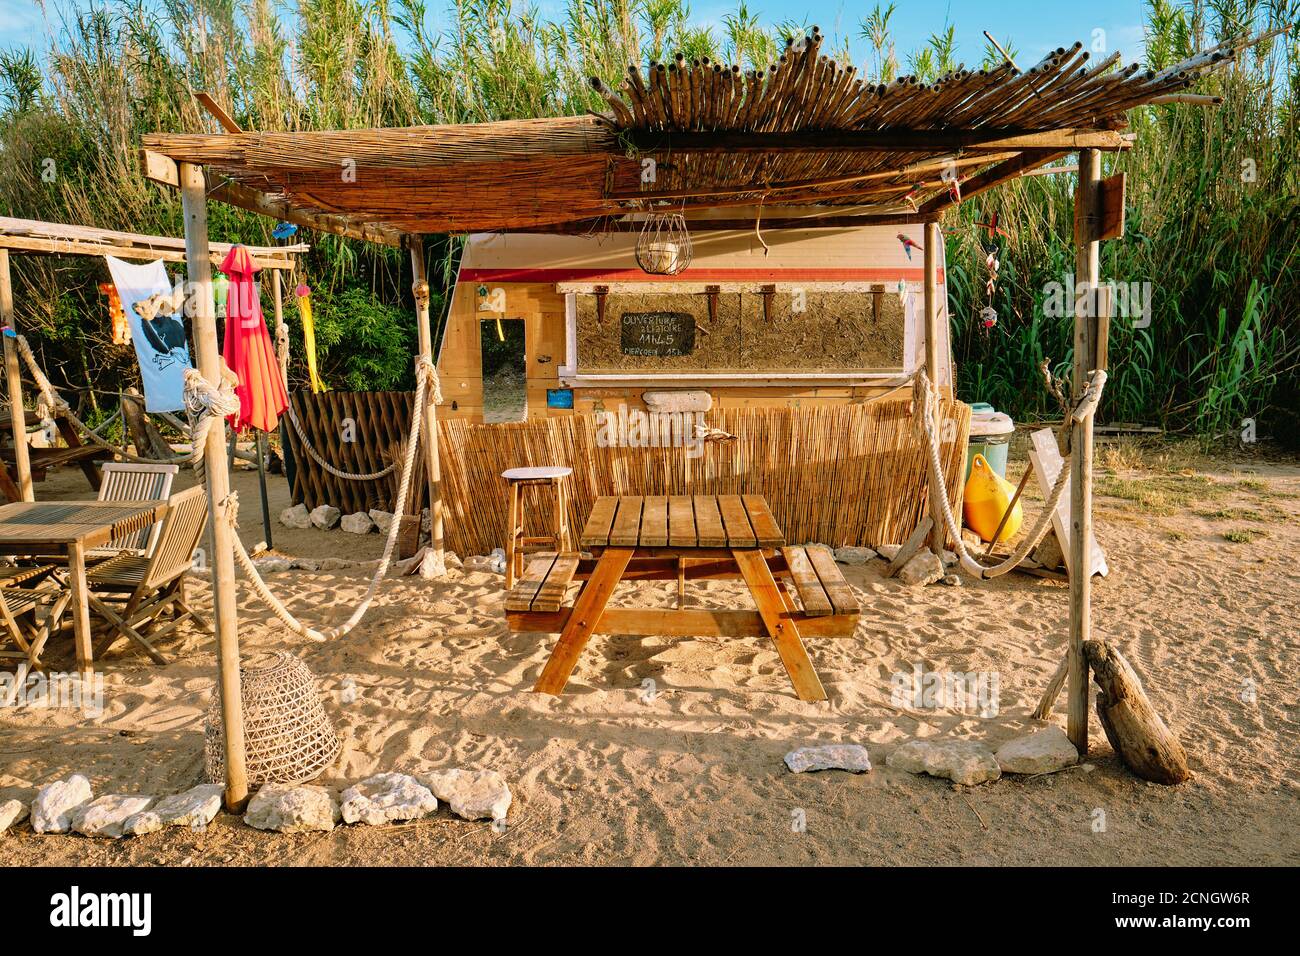 A rustic summer beach bar cafe shack / cabana made from recycled reclaimed materials in Corsica France - Corsica beach cafe. Stock Photo